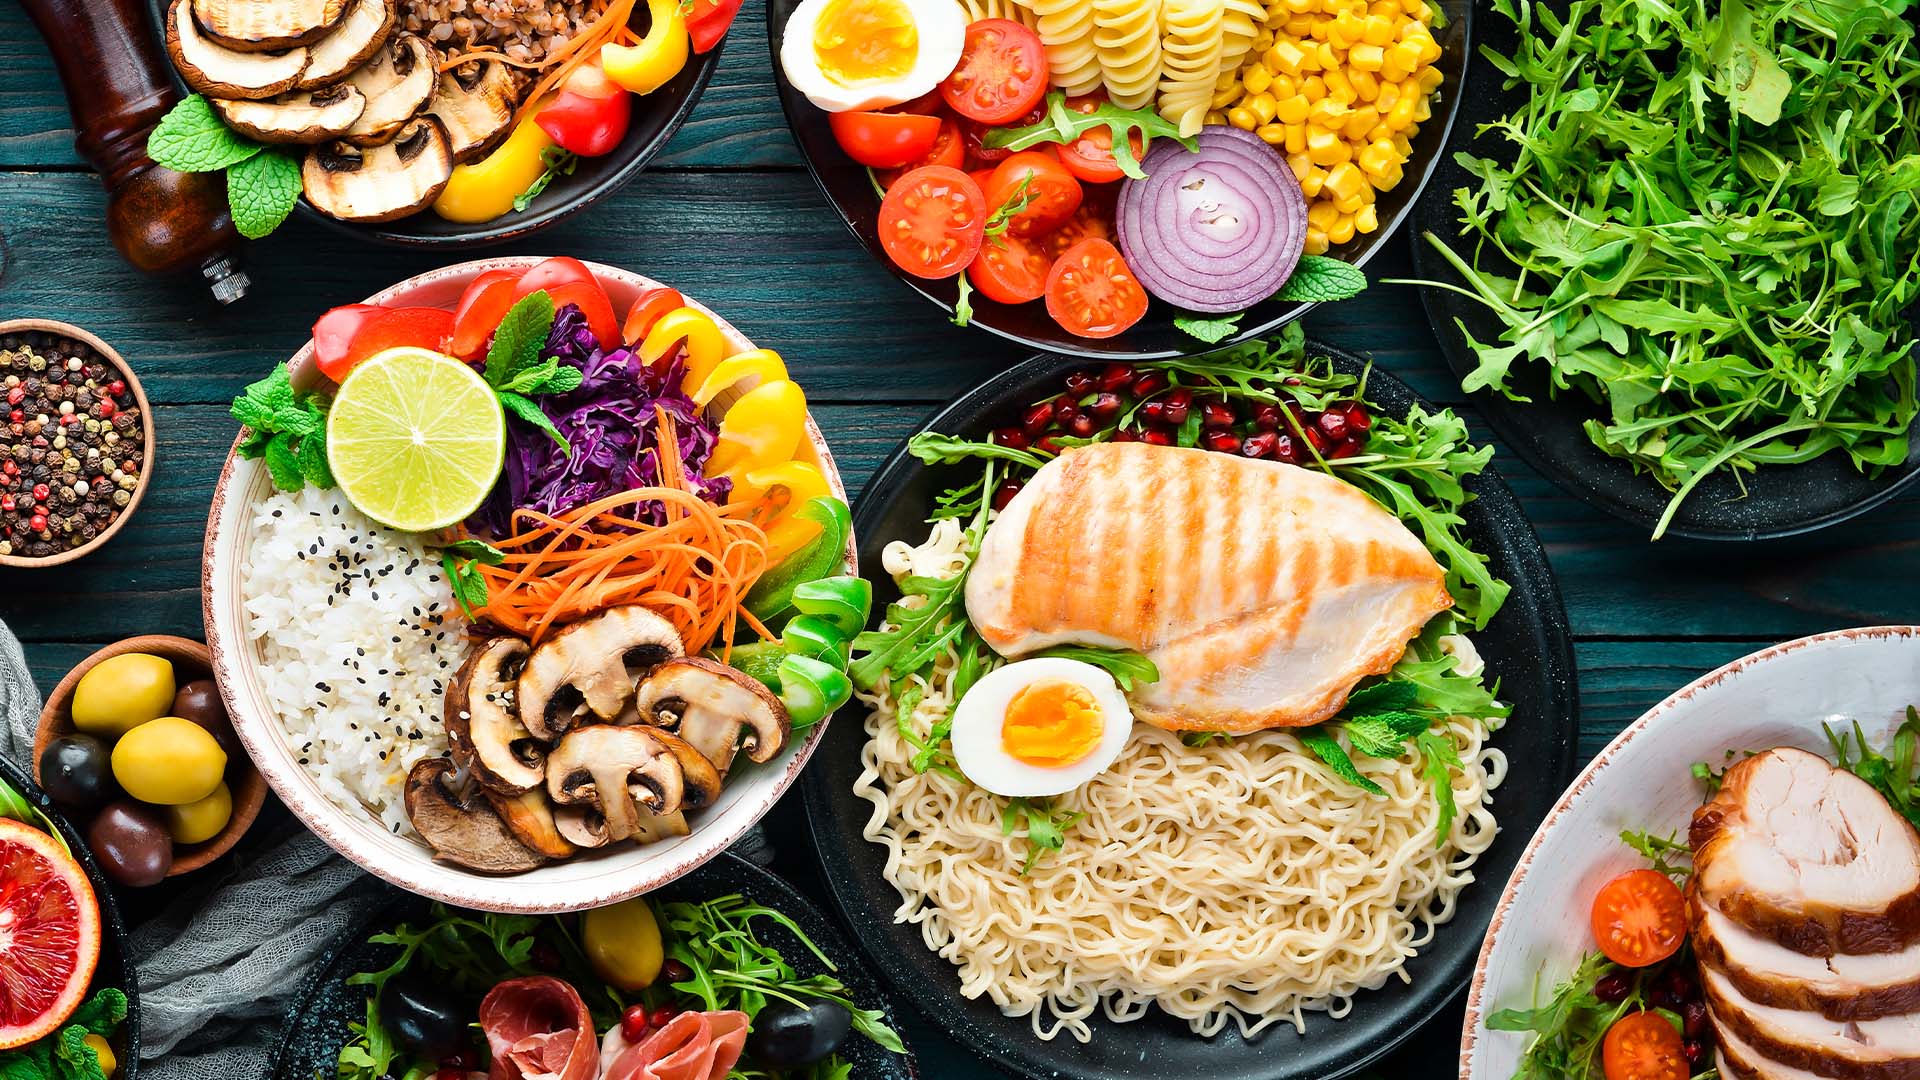 Wood table with colorful food in bowls, ramen noodles, mushrooms, onion, tomoatoes